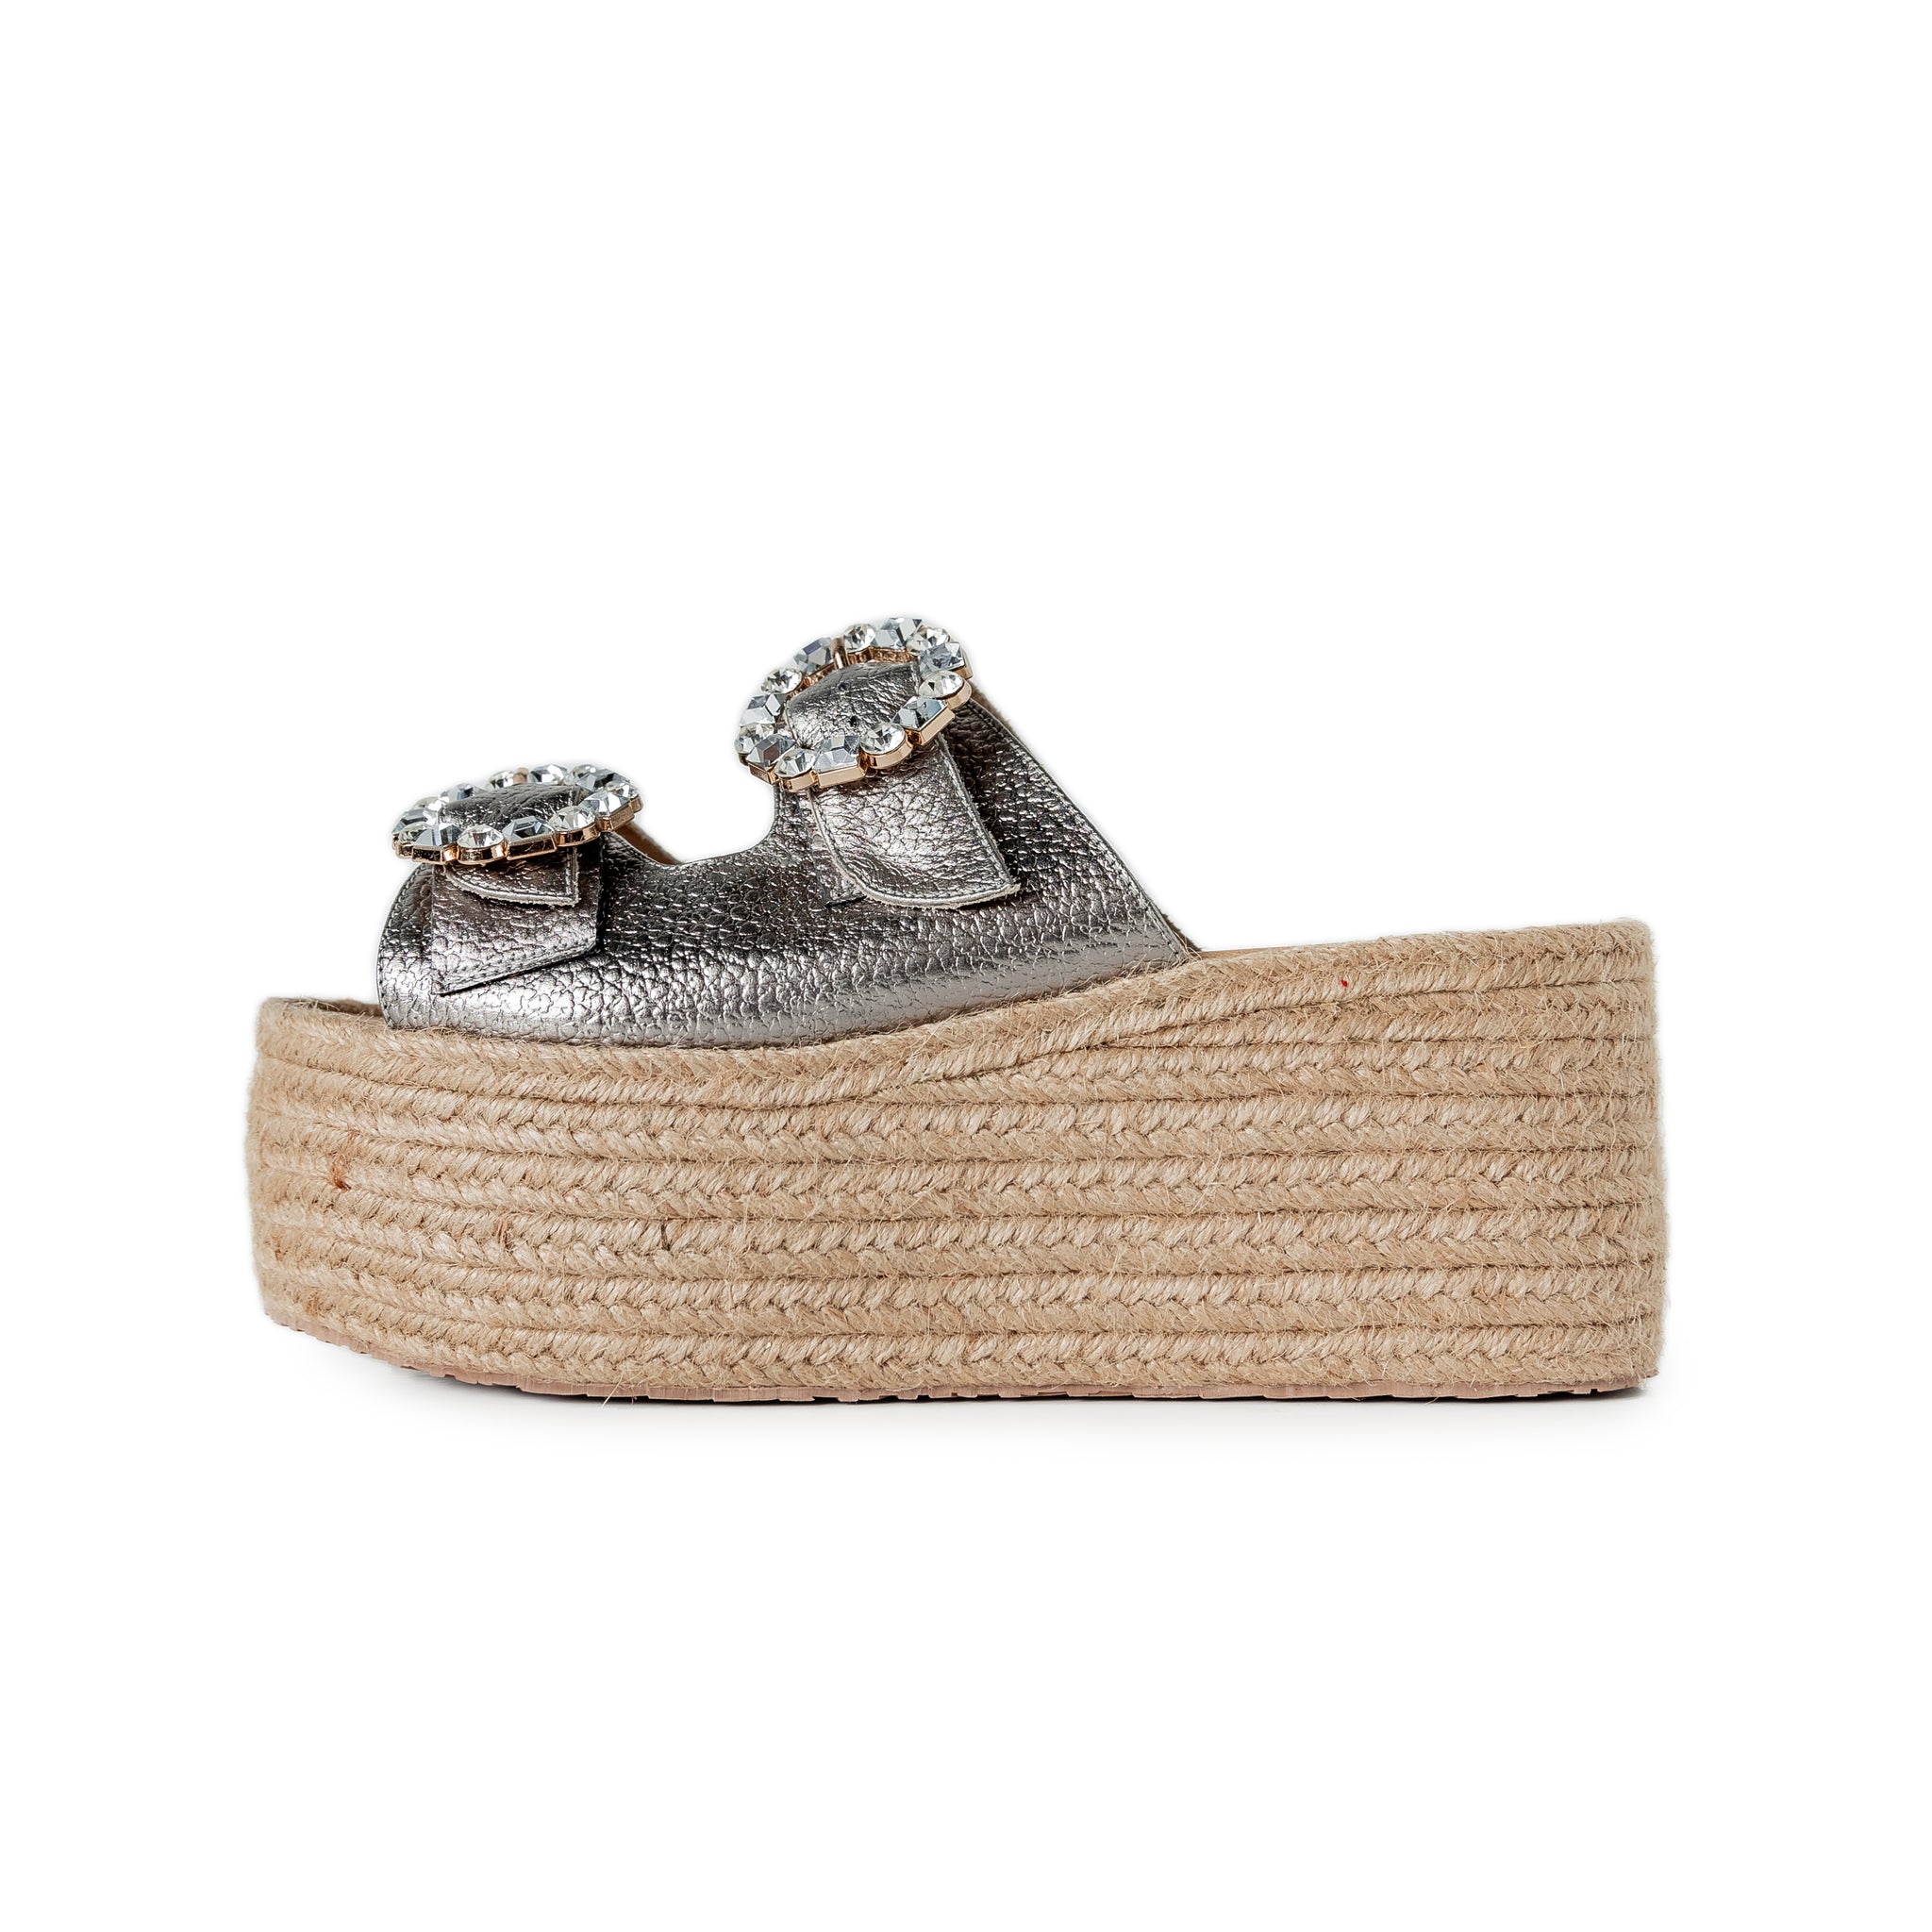 Brooke Espadrilles Plomo by Nataly Mendez Its base is lined with natural jute Leather upper with ornament Genuine Leather Handmade 3-inch heel height 2.5 inch platform